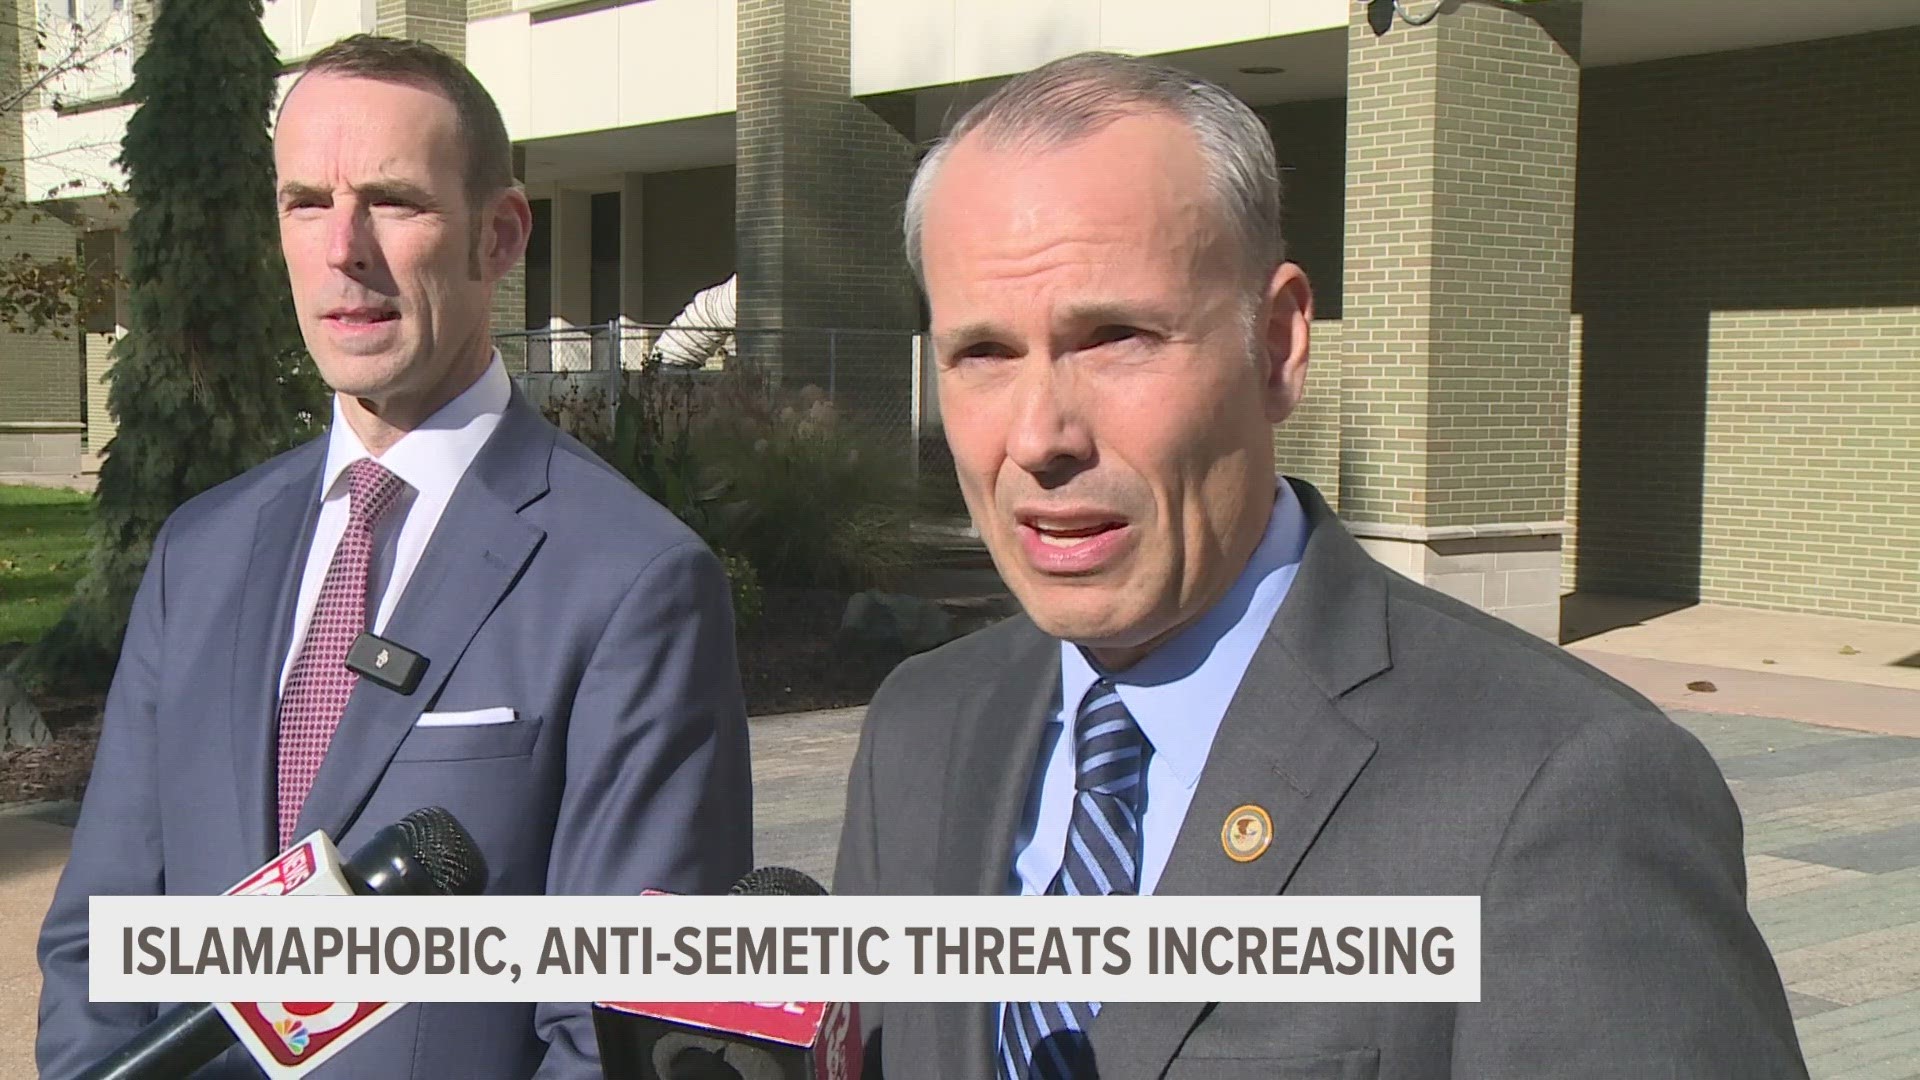 Federal law enforcement Is ramping up efforts to stave off a growing problem around anti-Semitic and Islamophobic threats.